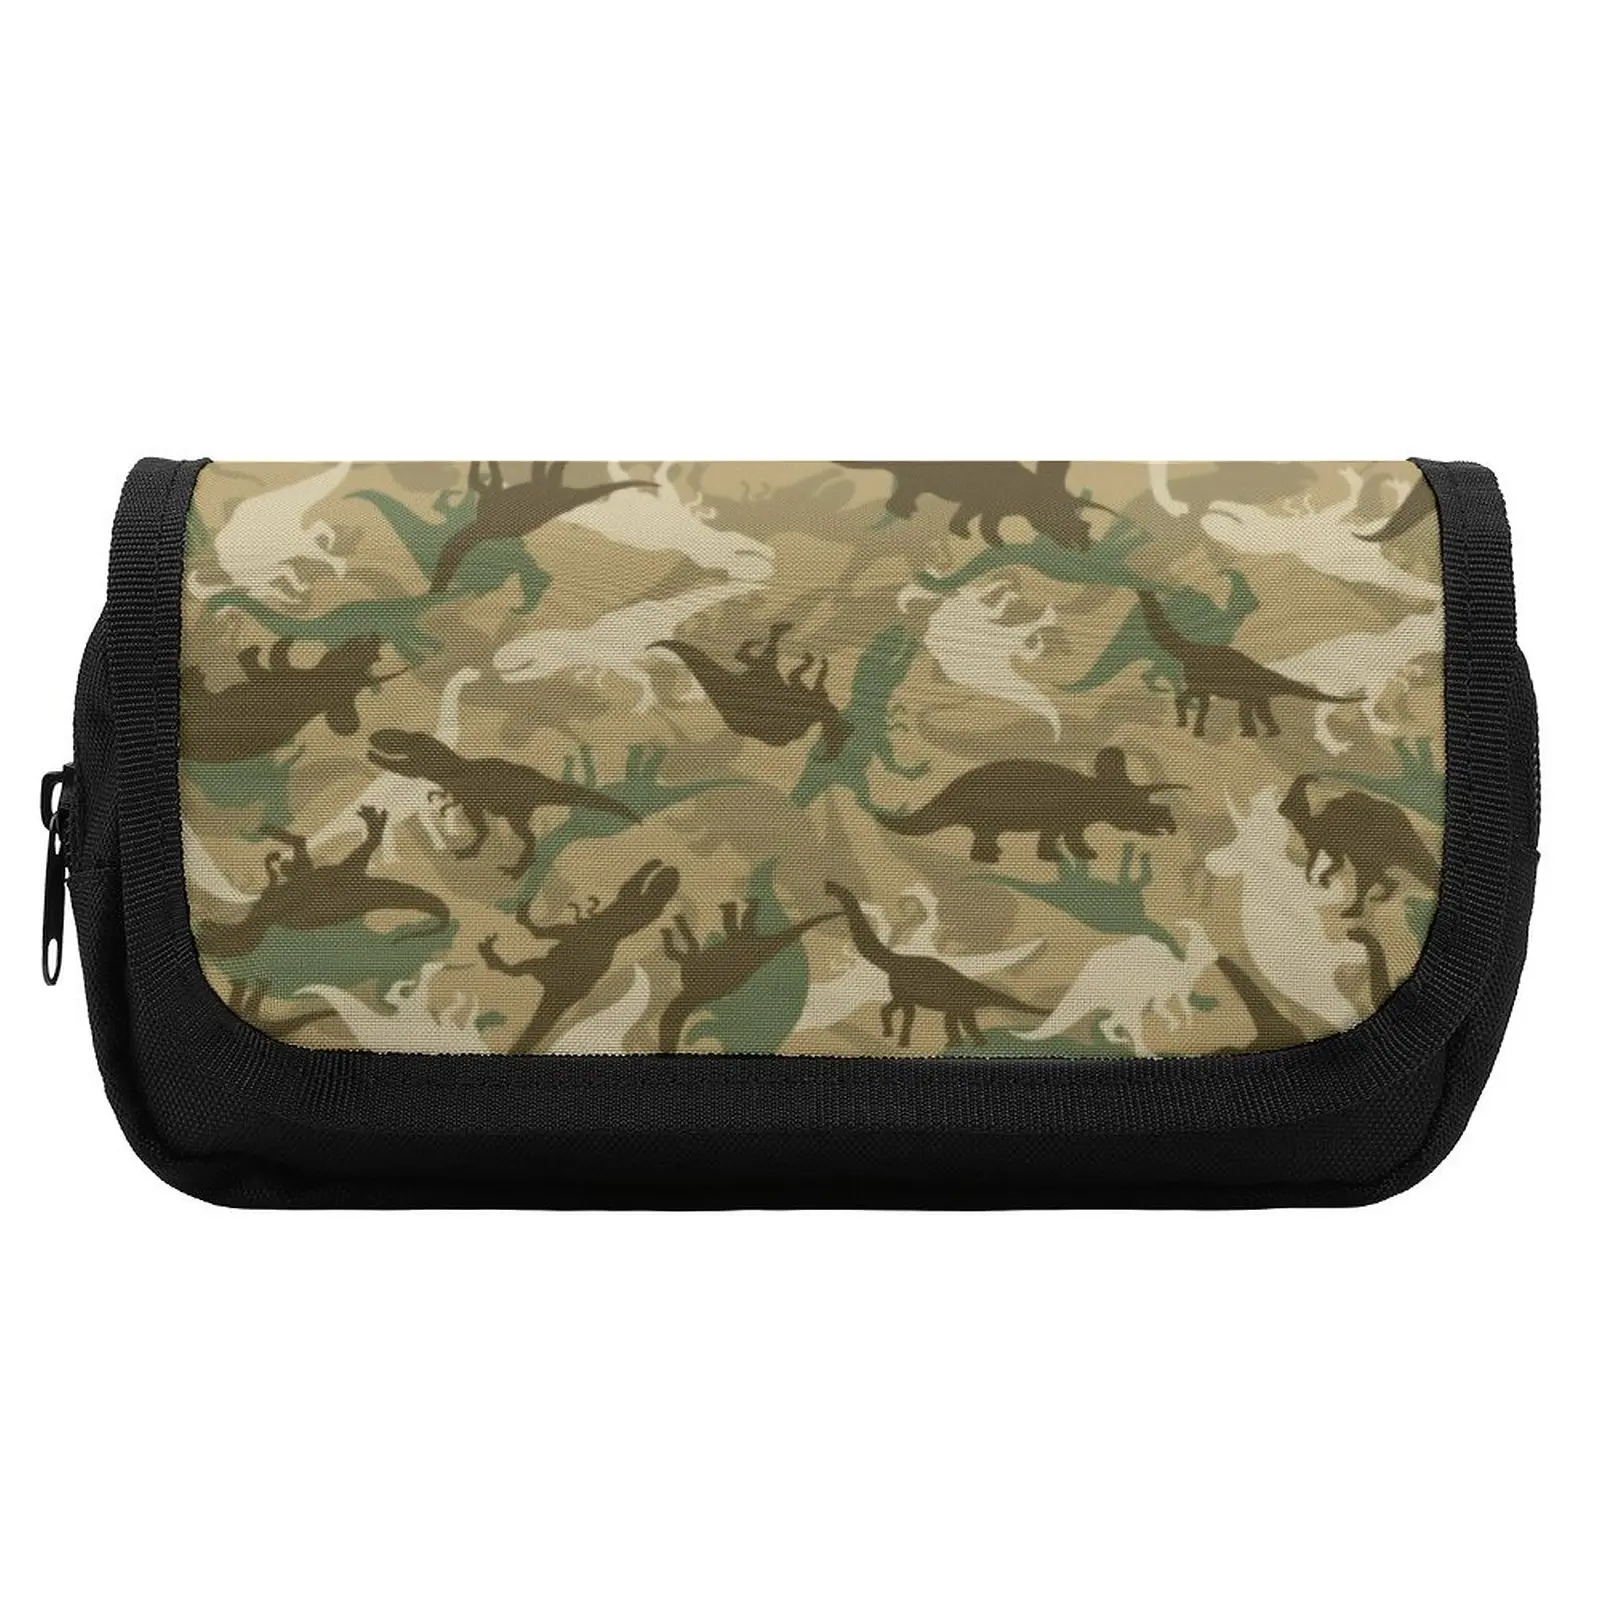 Camouflage Dinosaur Pencil Case Abstract Animal Hook and Loop Cool Double Pockets Pencil Box University Pen Organizer